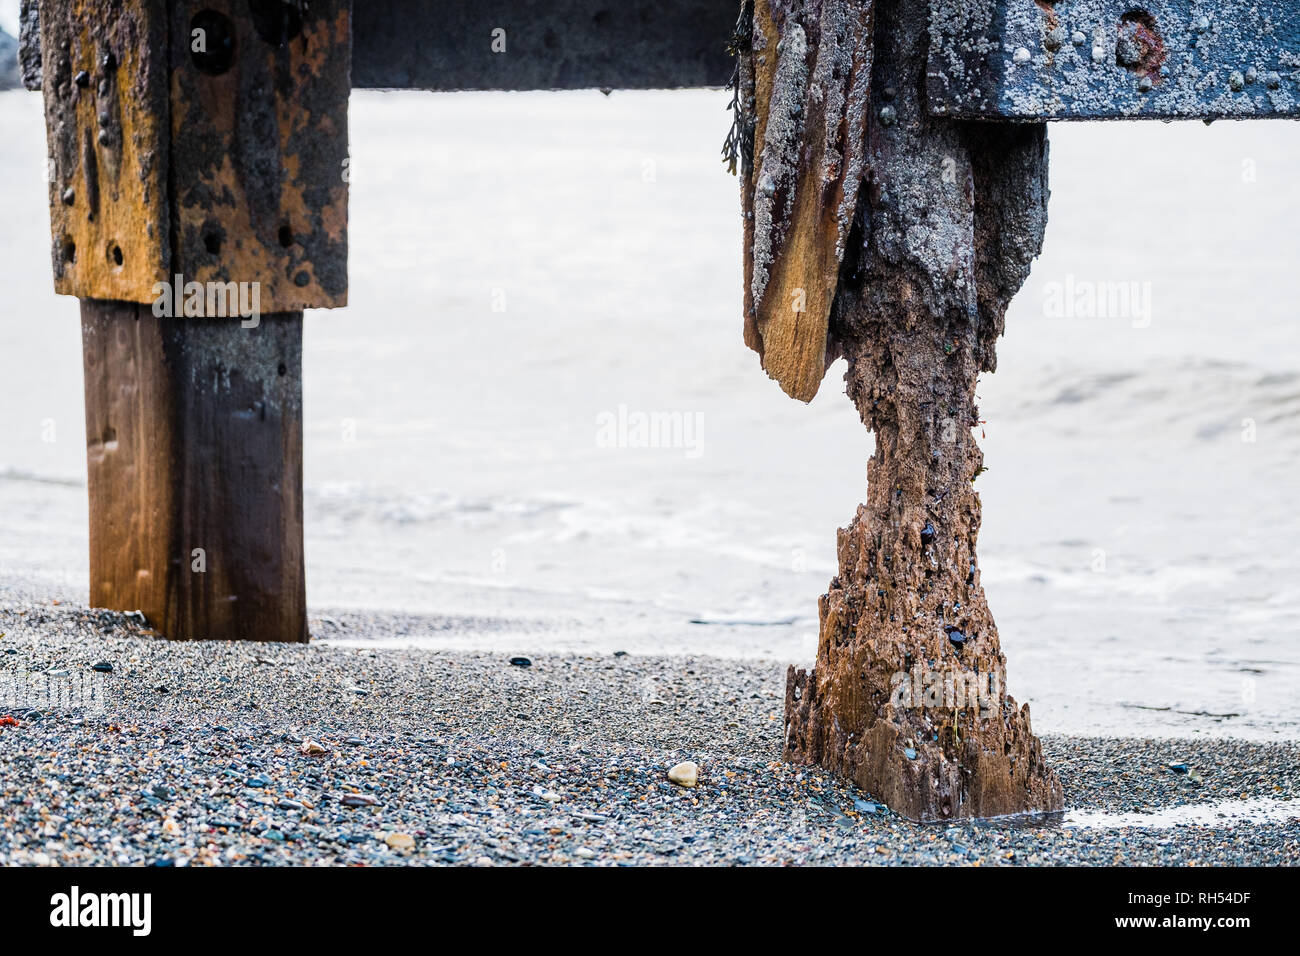 Termites of the Sea: The severley degraded and Teredo worm-attacked pillars at the wooden jetty on Aberystwyth north beach December 2018 Stock Photo